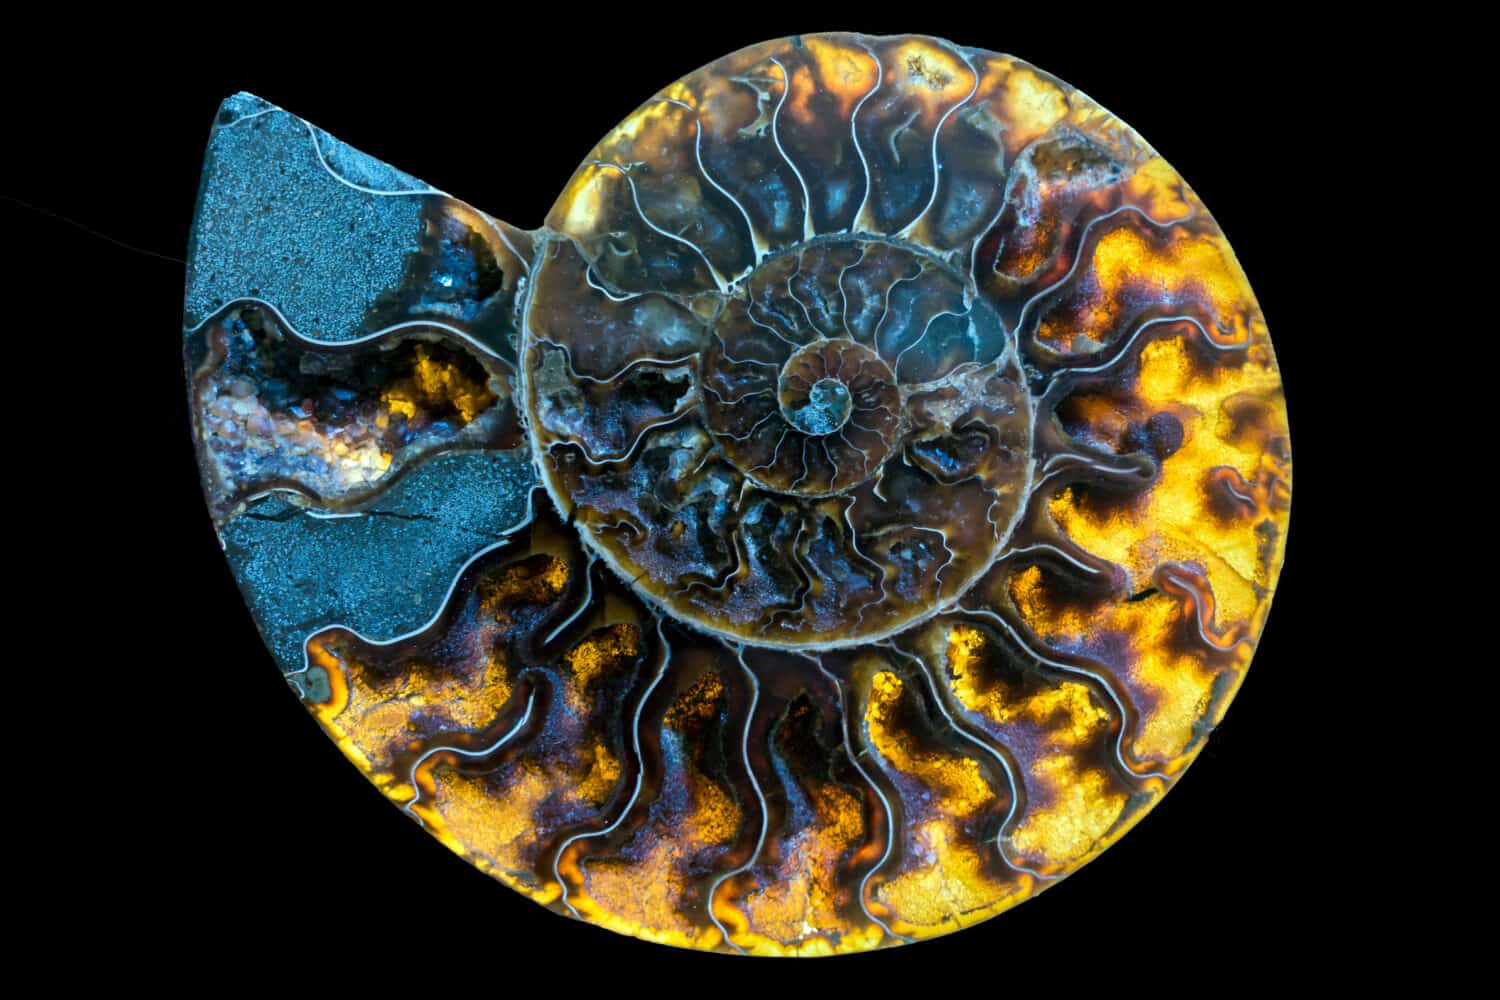 A fossilized gemstone ammolite cross-section displays texture.Nautilus of 2 mil. years old.